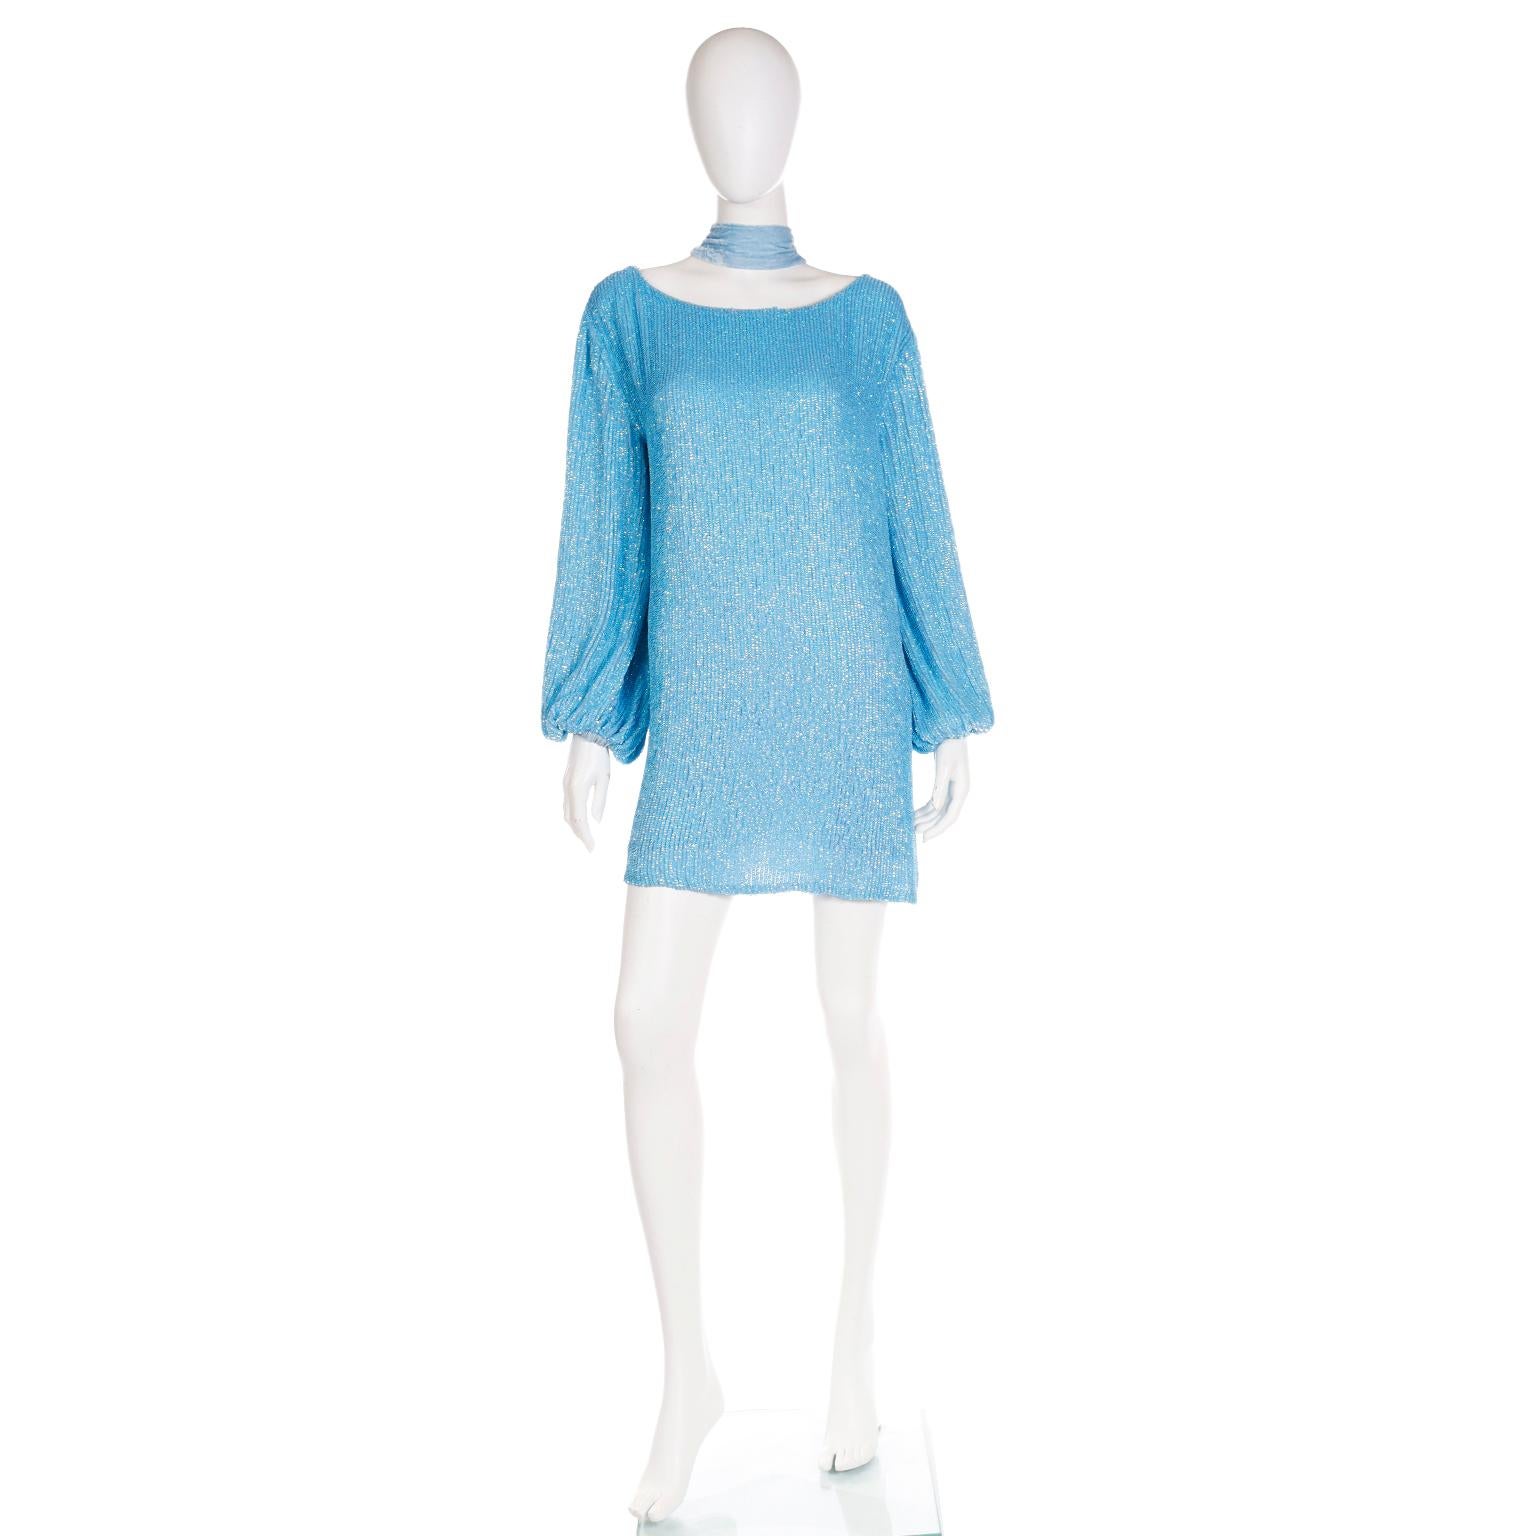 This is a lovely deadstock Retrofete sequin mini dress in a beautiful shade of blue with its original tag still attached.  This fun dress can be worn loosely, belted, or as a tunic over pants. The blue velvet sash style belt can also be worn as a